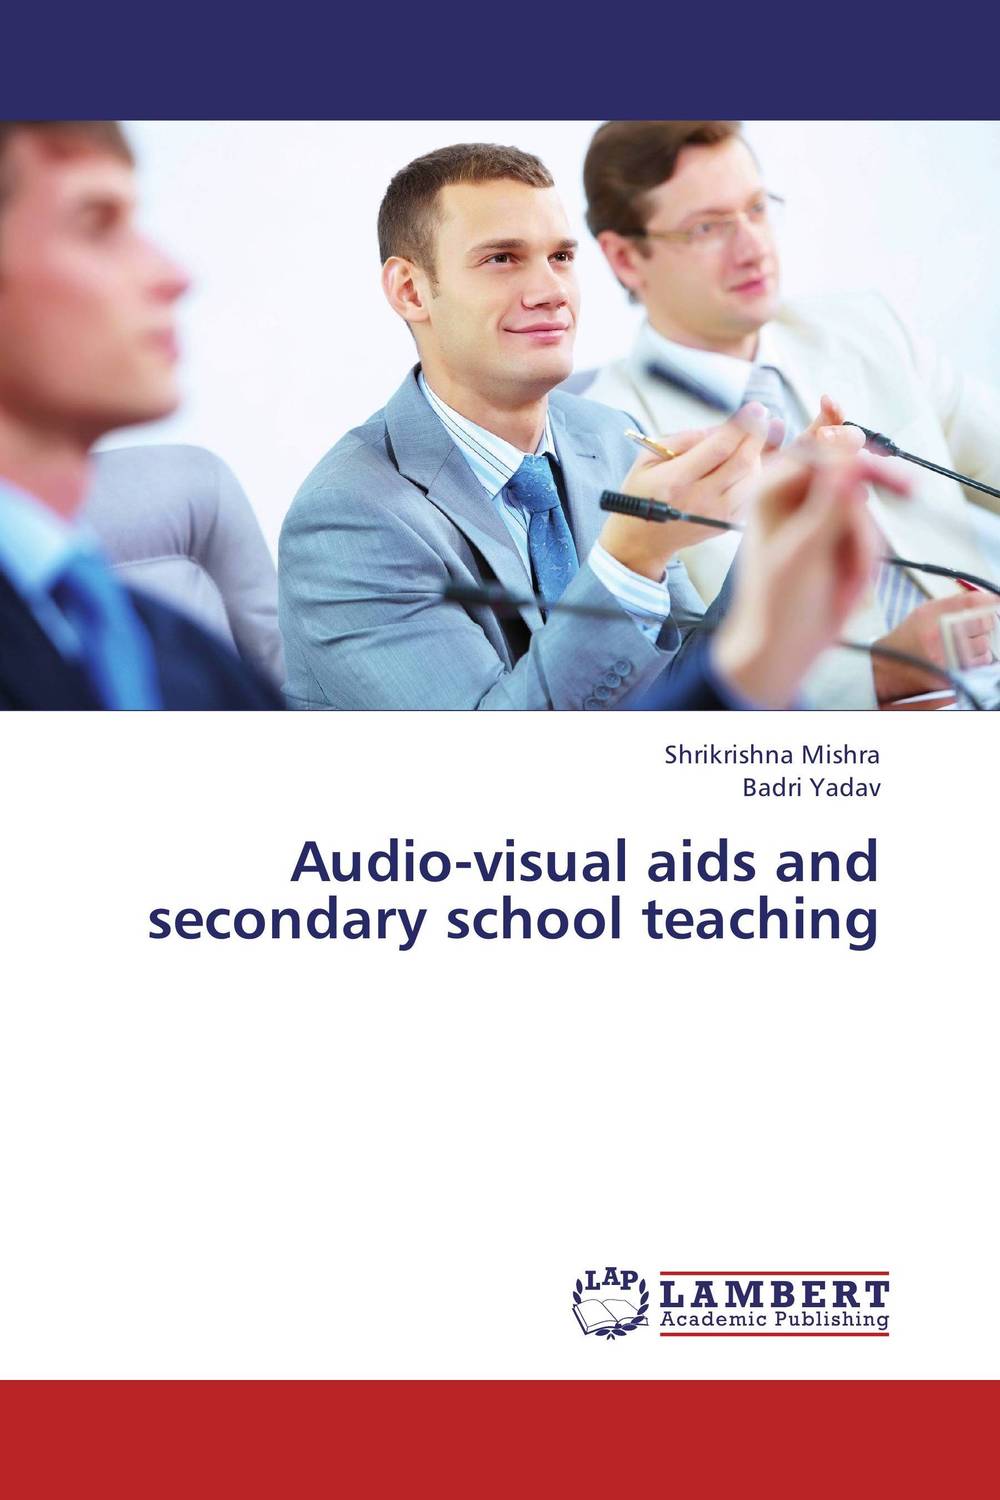 Audio-visual aids and secondary school teaching